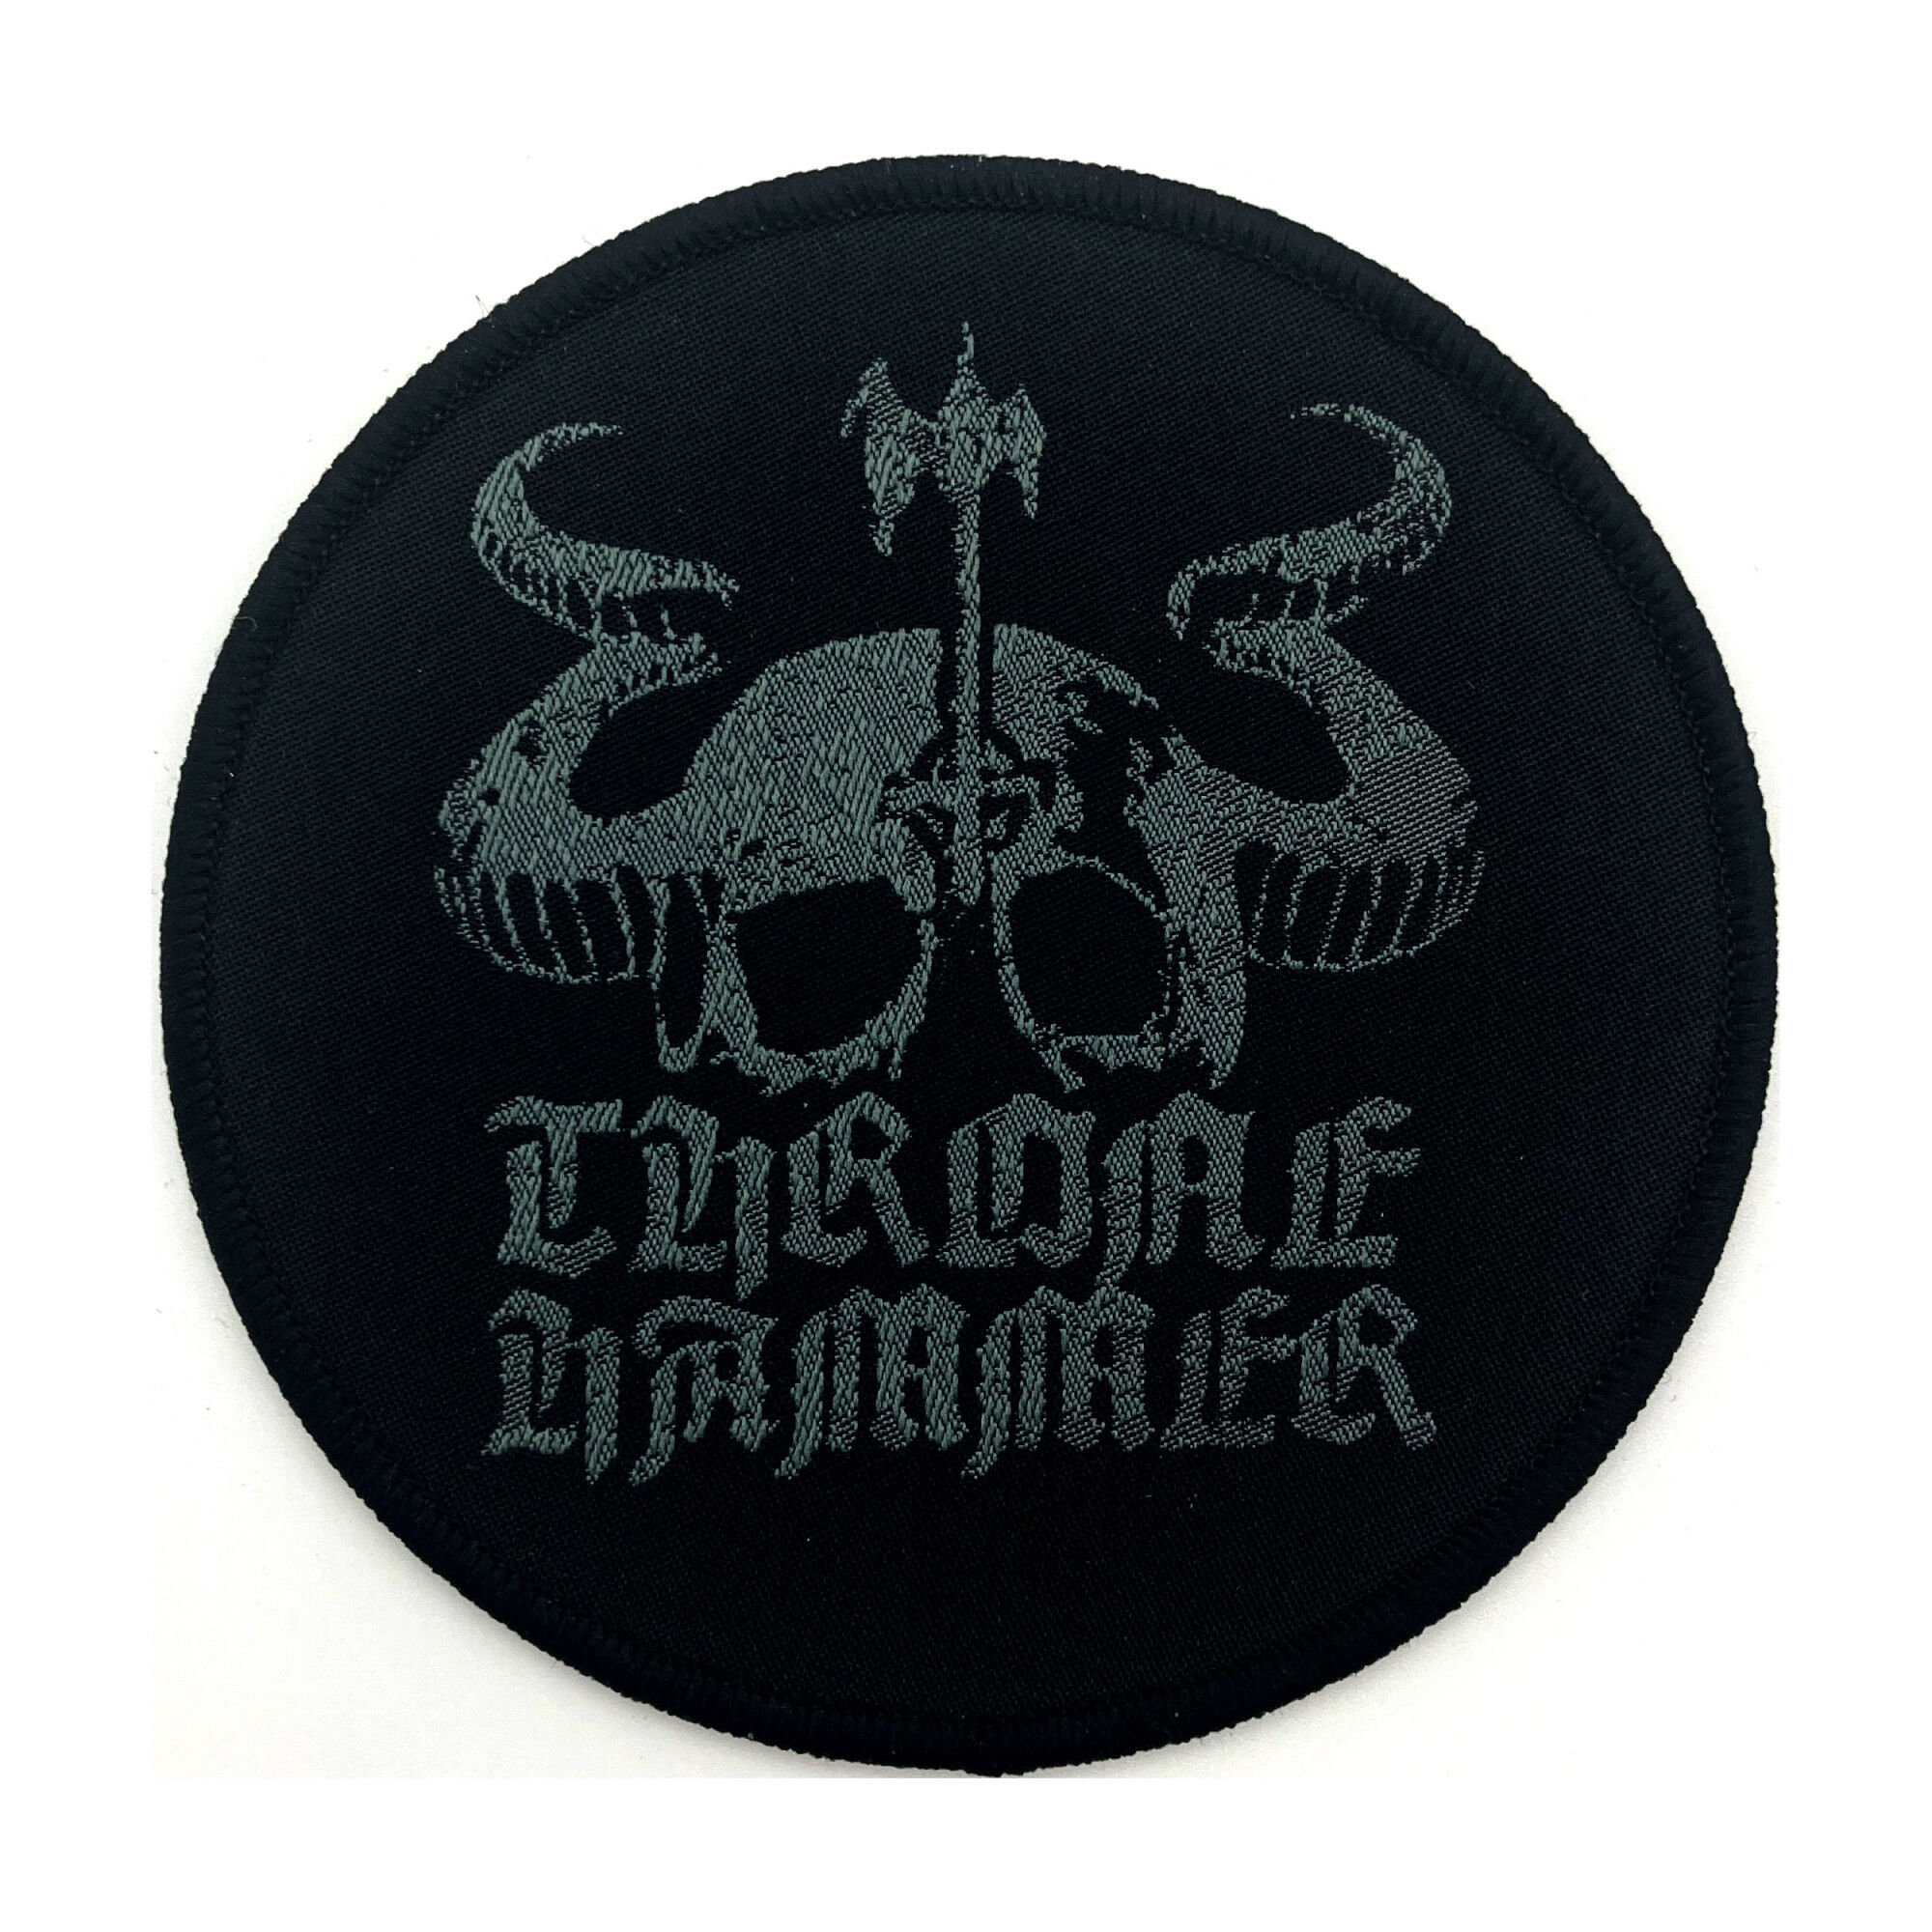 THRONEHAMMER - Horned Skull Round Patch [PATCH]